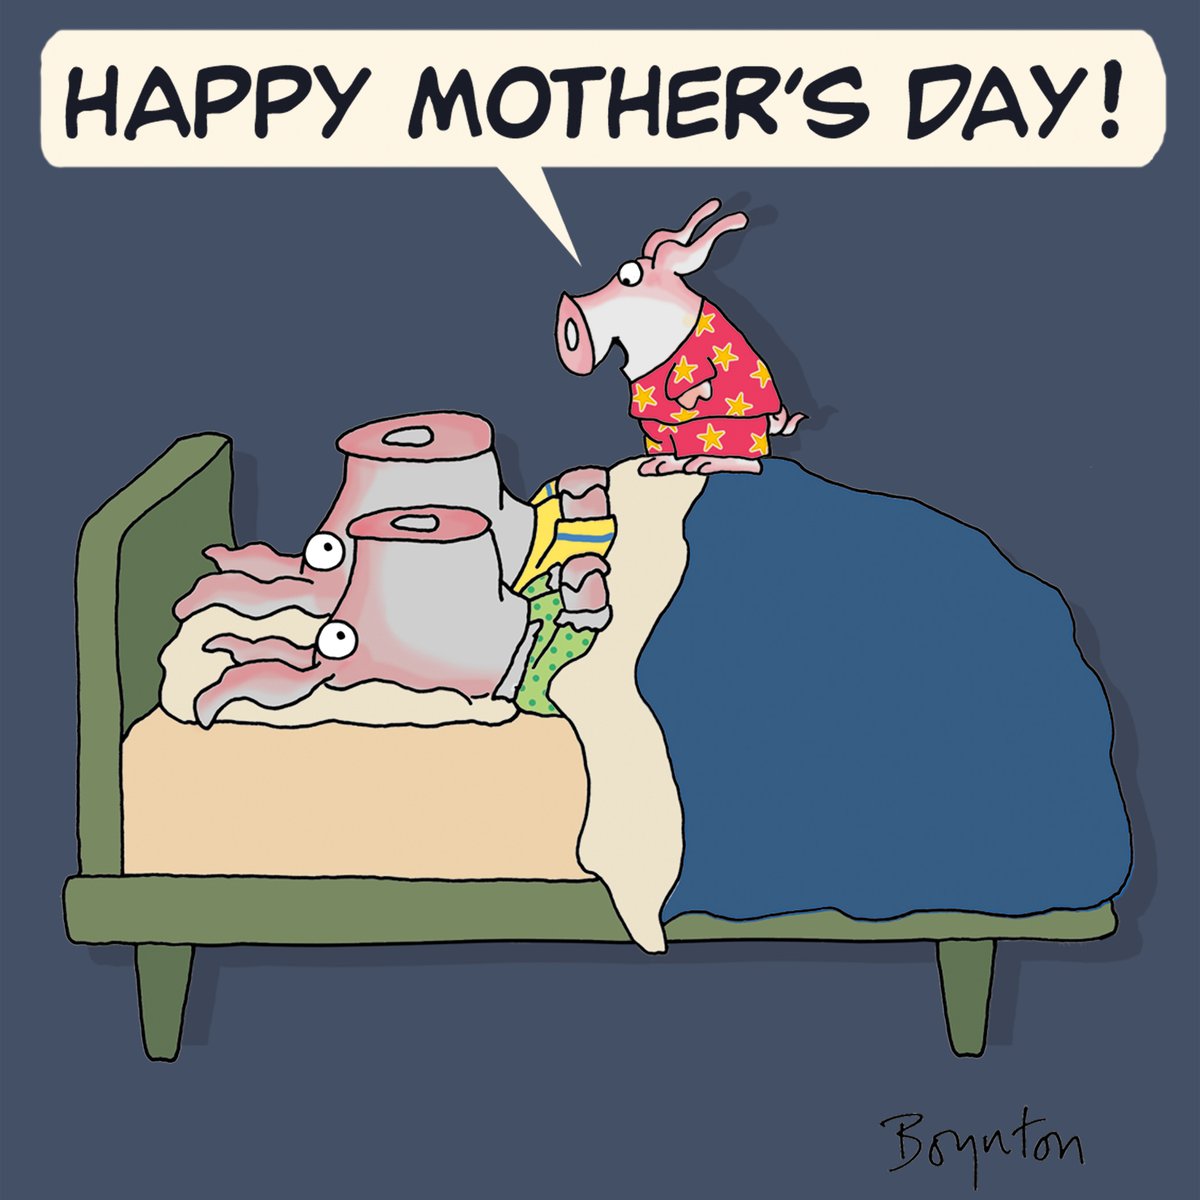 Now that I have your full attention, I'd like to wish you a wonderful Mother's Day. #MothersDay